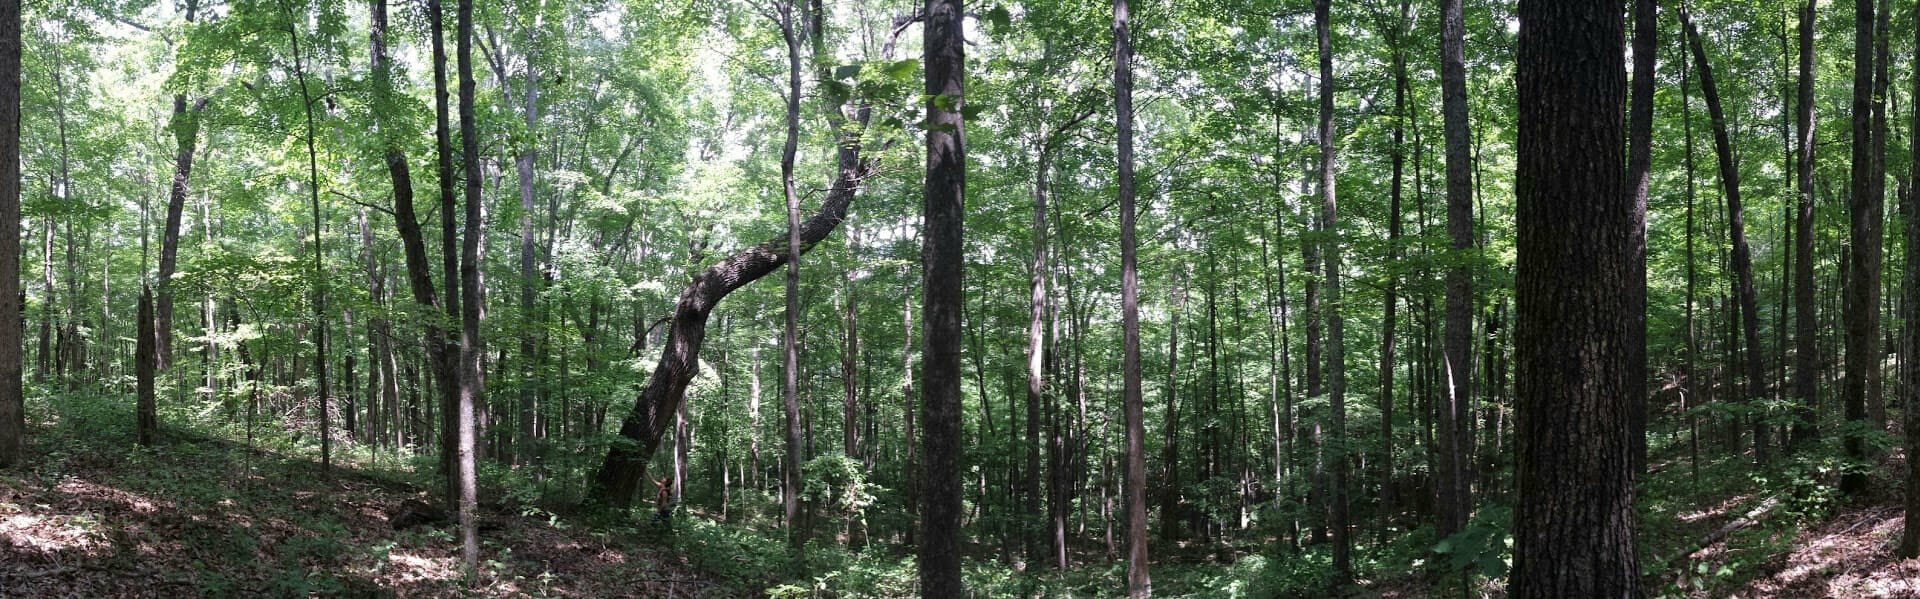 This is an example of forest in the Greenwood project that was approved for oak woodland management.
